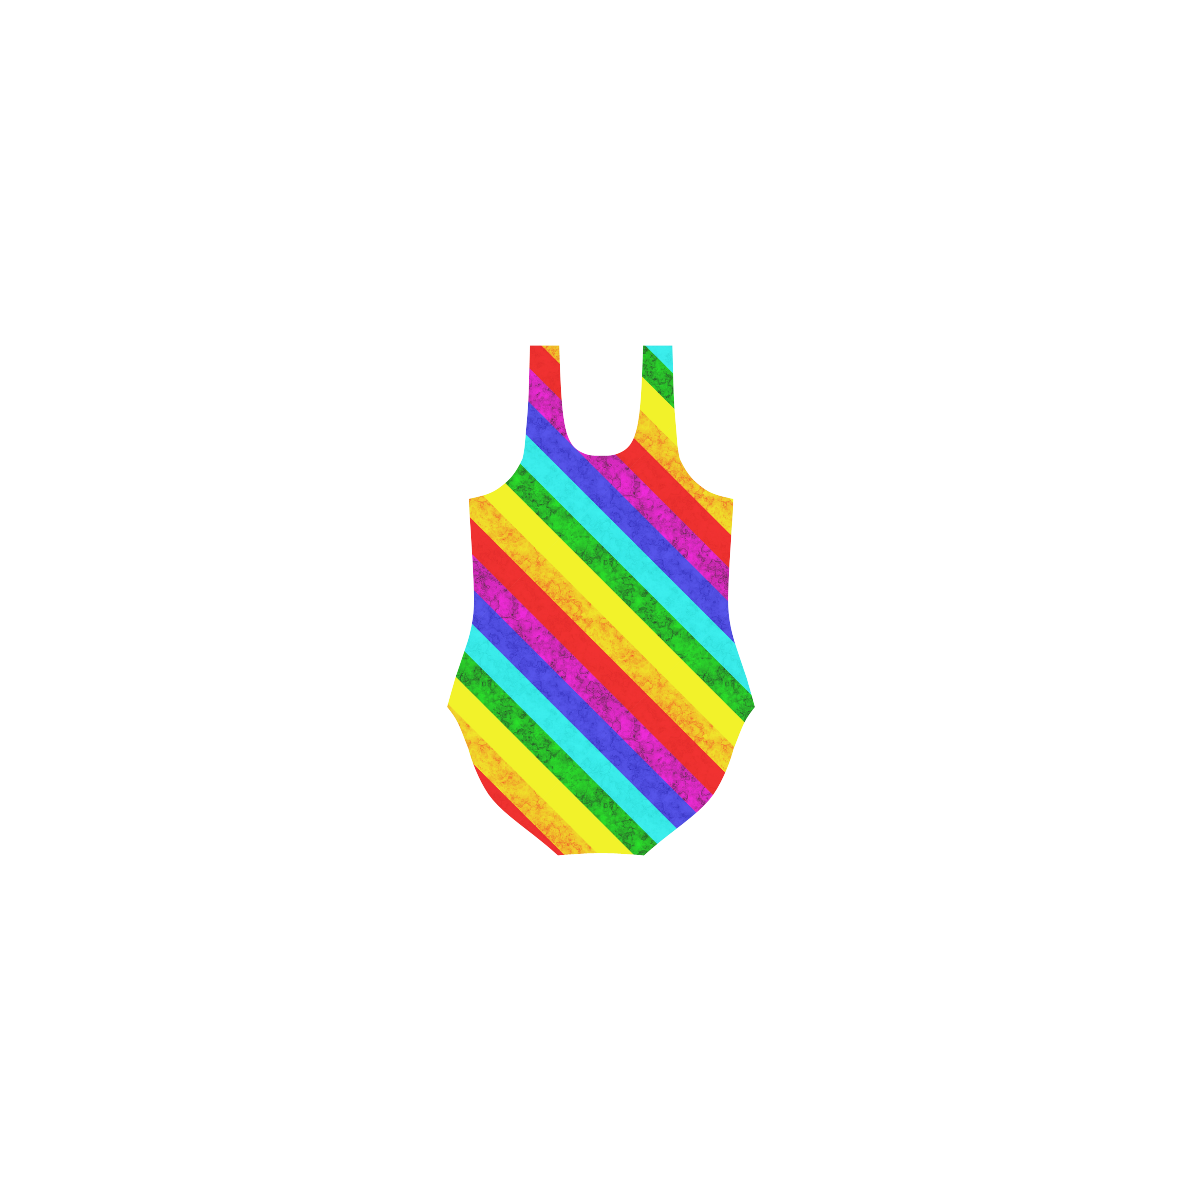 Rainbow abstract pattern Vest One Piece Swimsuit (Model S04)